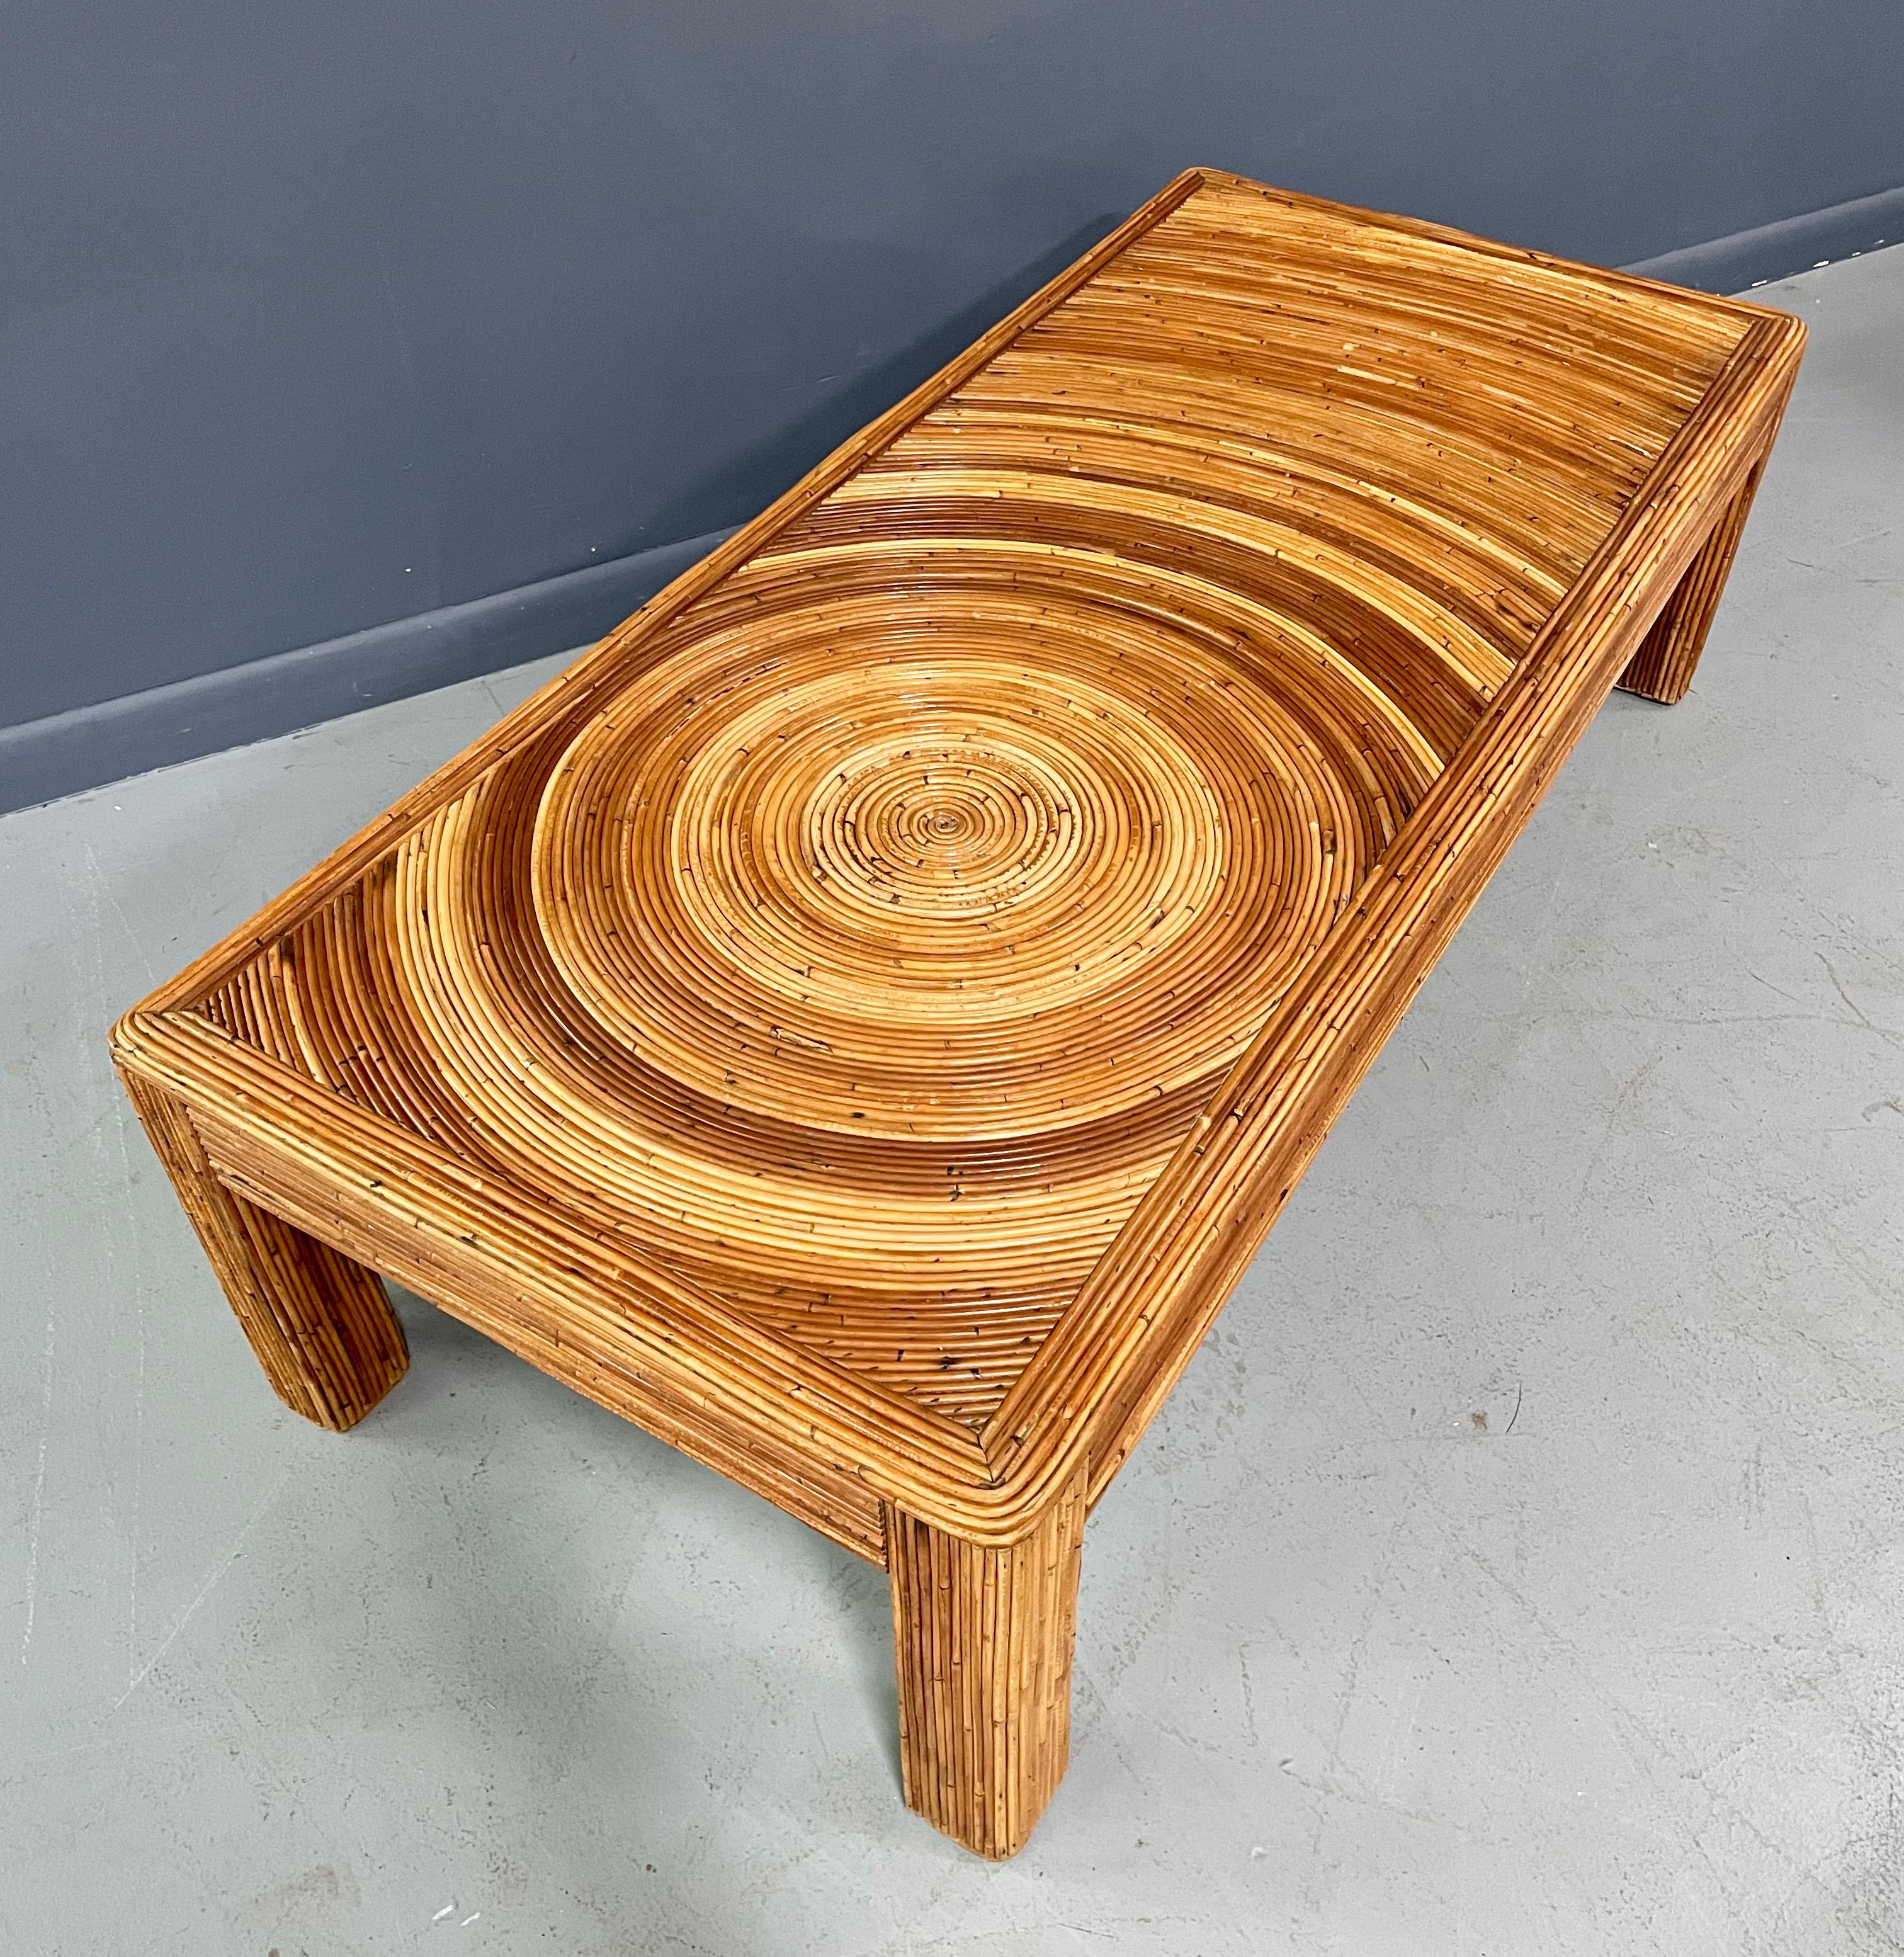 Wonderful generously proportioned coffee table 